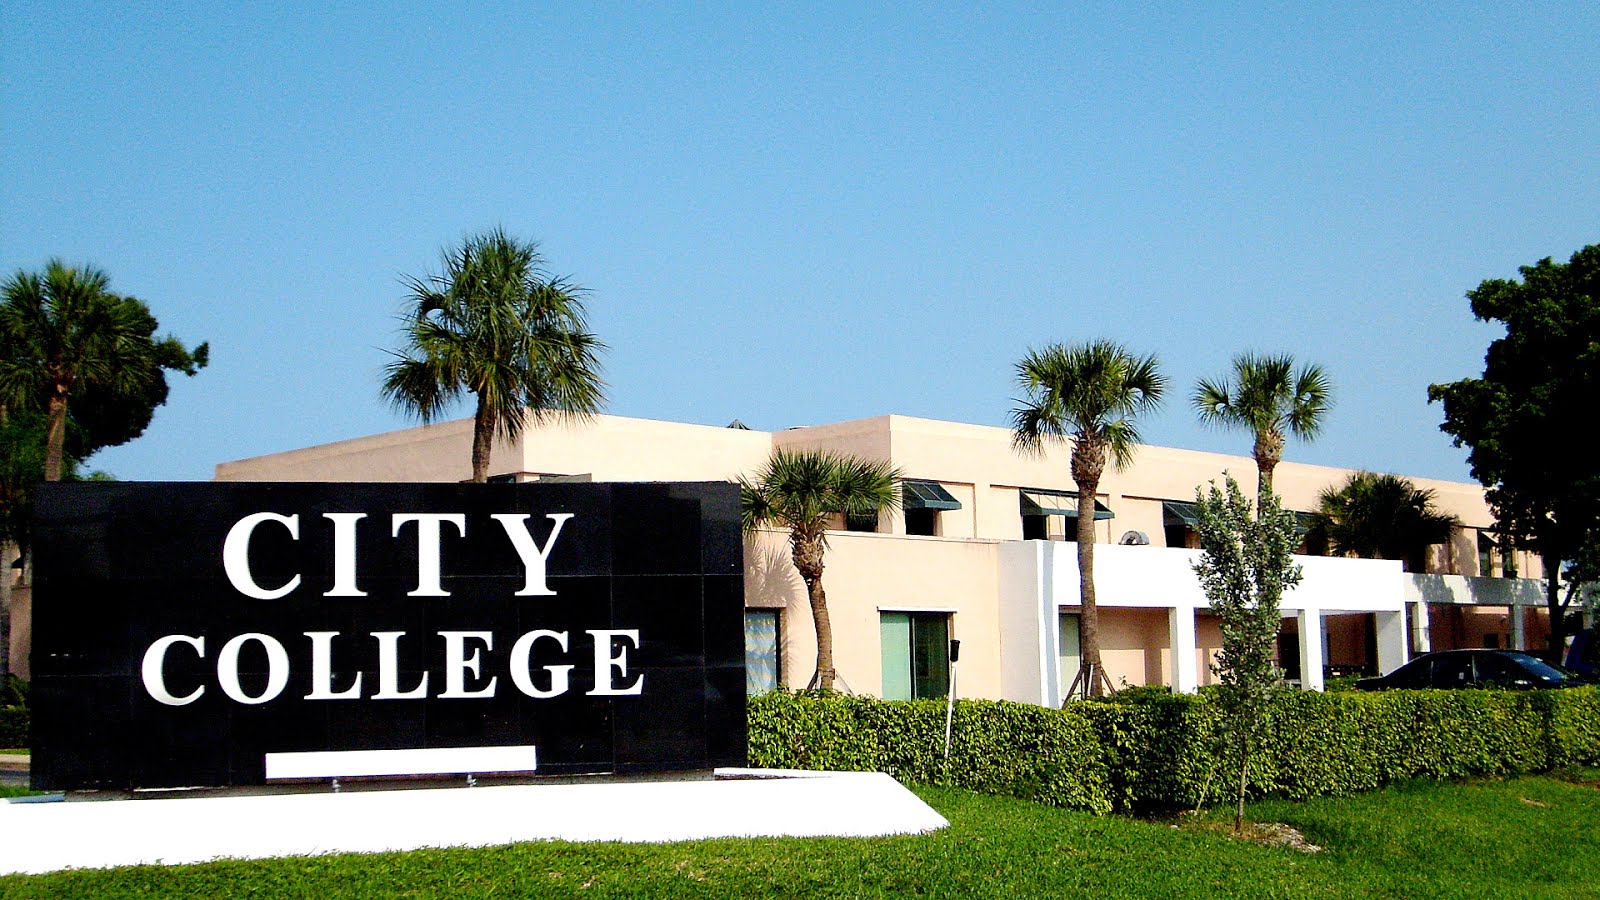 City College In Fort Lauderdale - Trip to Cities